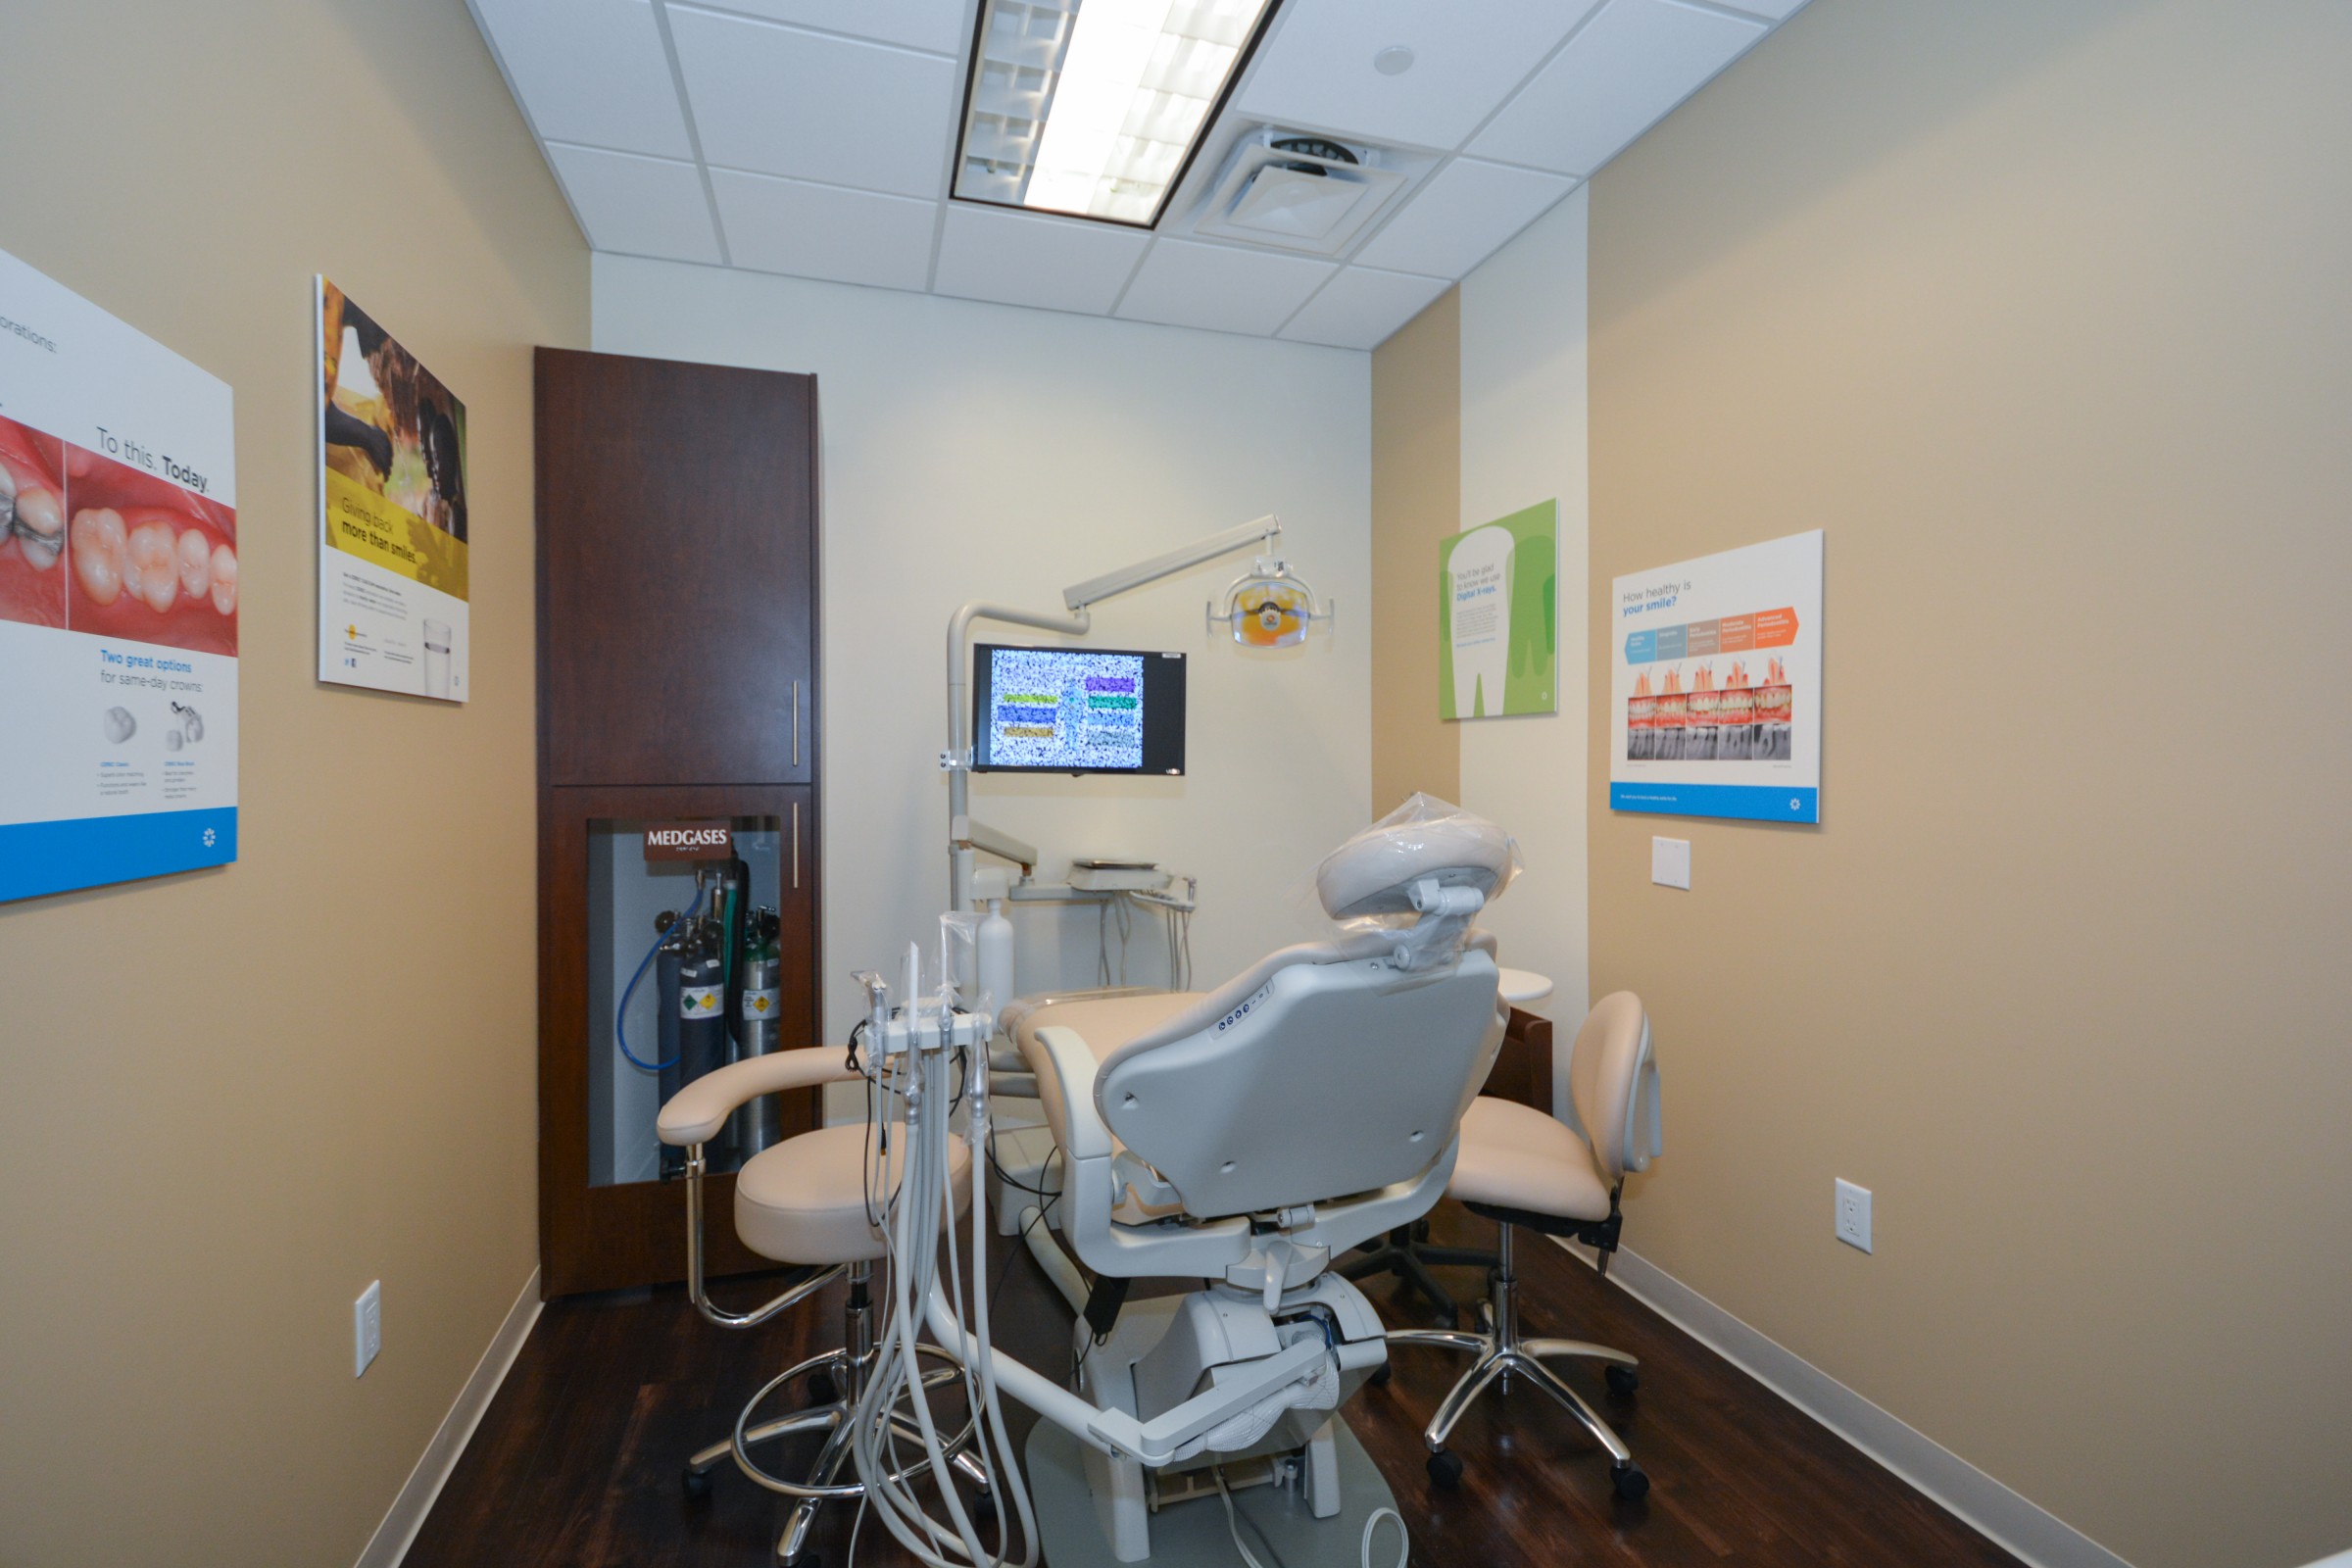 Our paperless system delivers electronic charting, digital imaging and enhanced case presentation at Weston Modern Dentistry Weston (954)248-2895